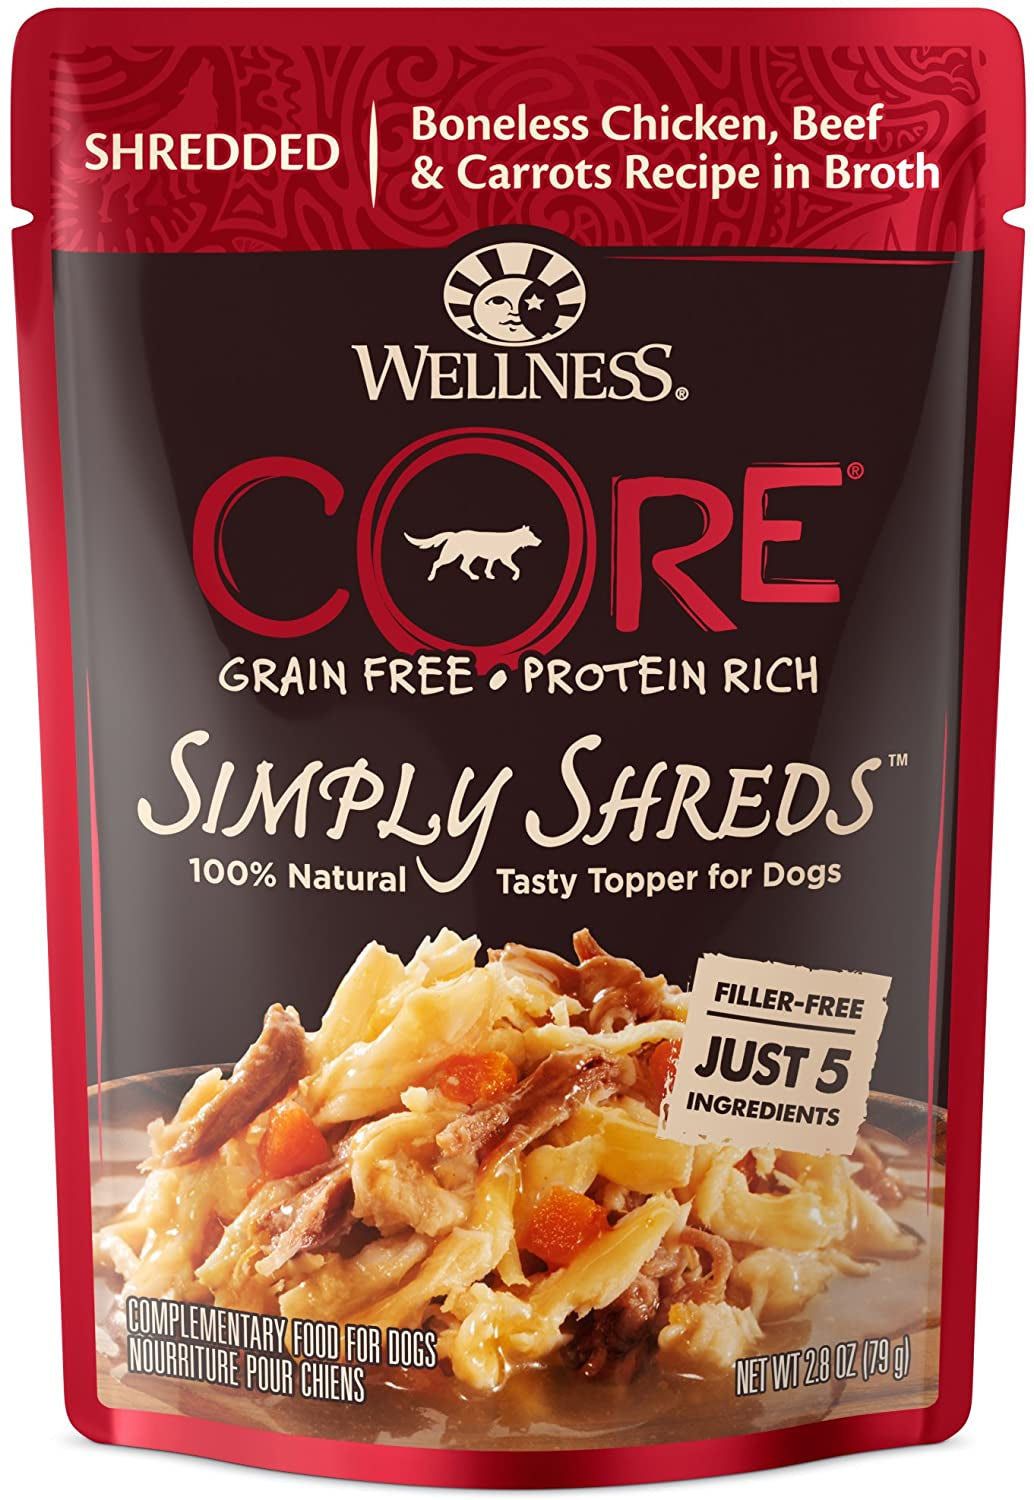 Wellness CORE Simply Shreds Grain Free Dry Dog Food Topper, Protein Rich Tasty Topper, Mixer or Treat for Dogs, Wet Dog Food Pouch, Natural, 2.8 Ounce Pouch (Pack of 12), Filler Free, 5 Ingredients